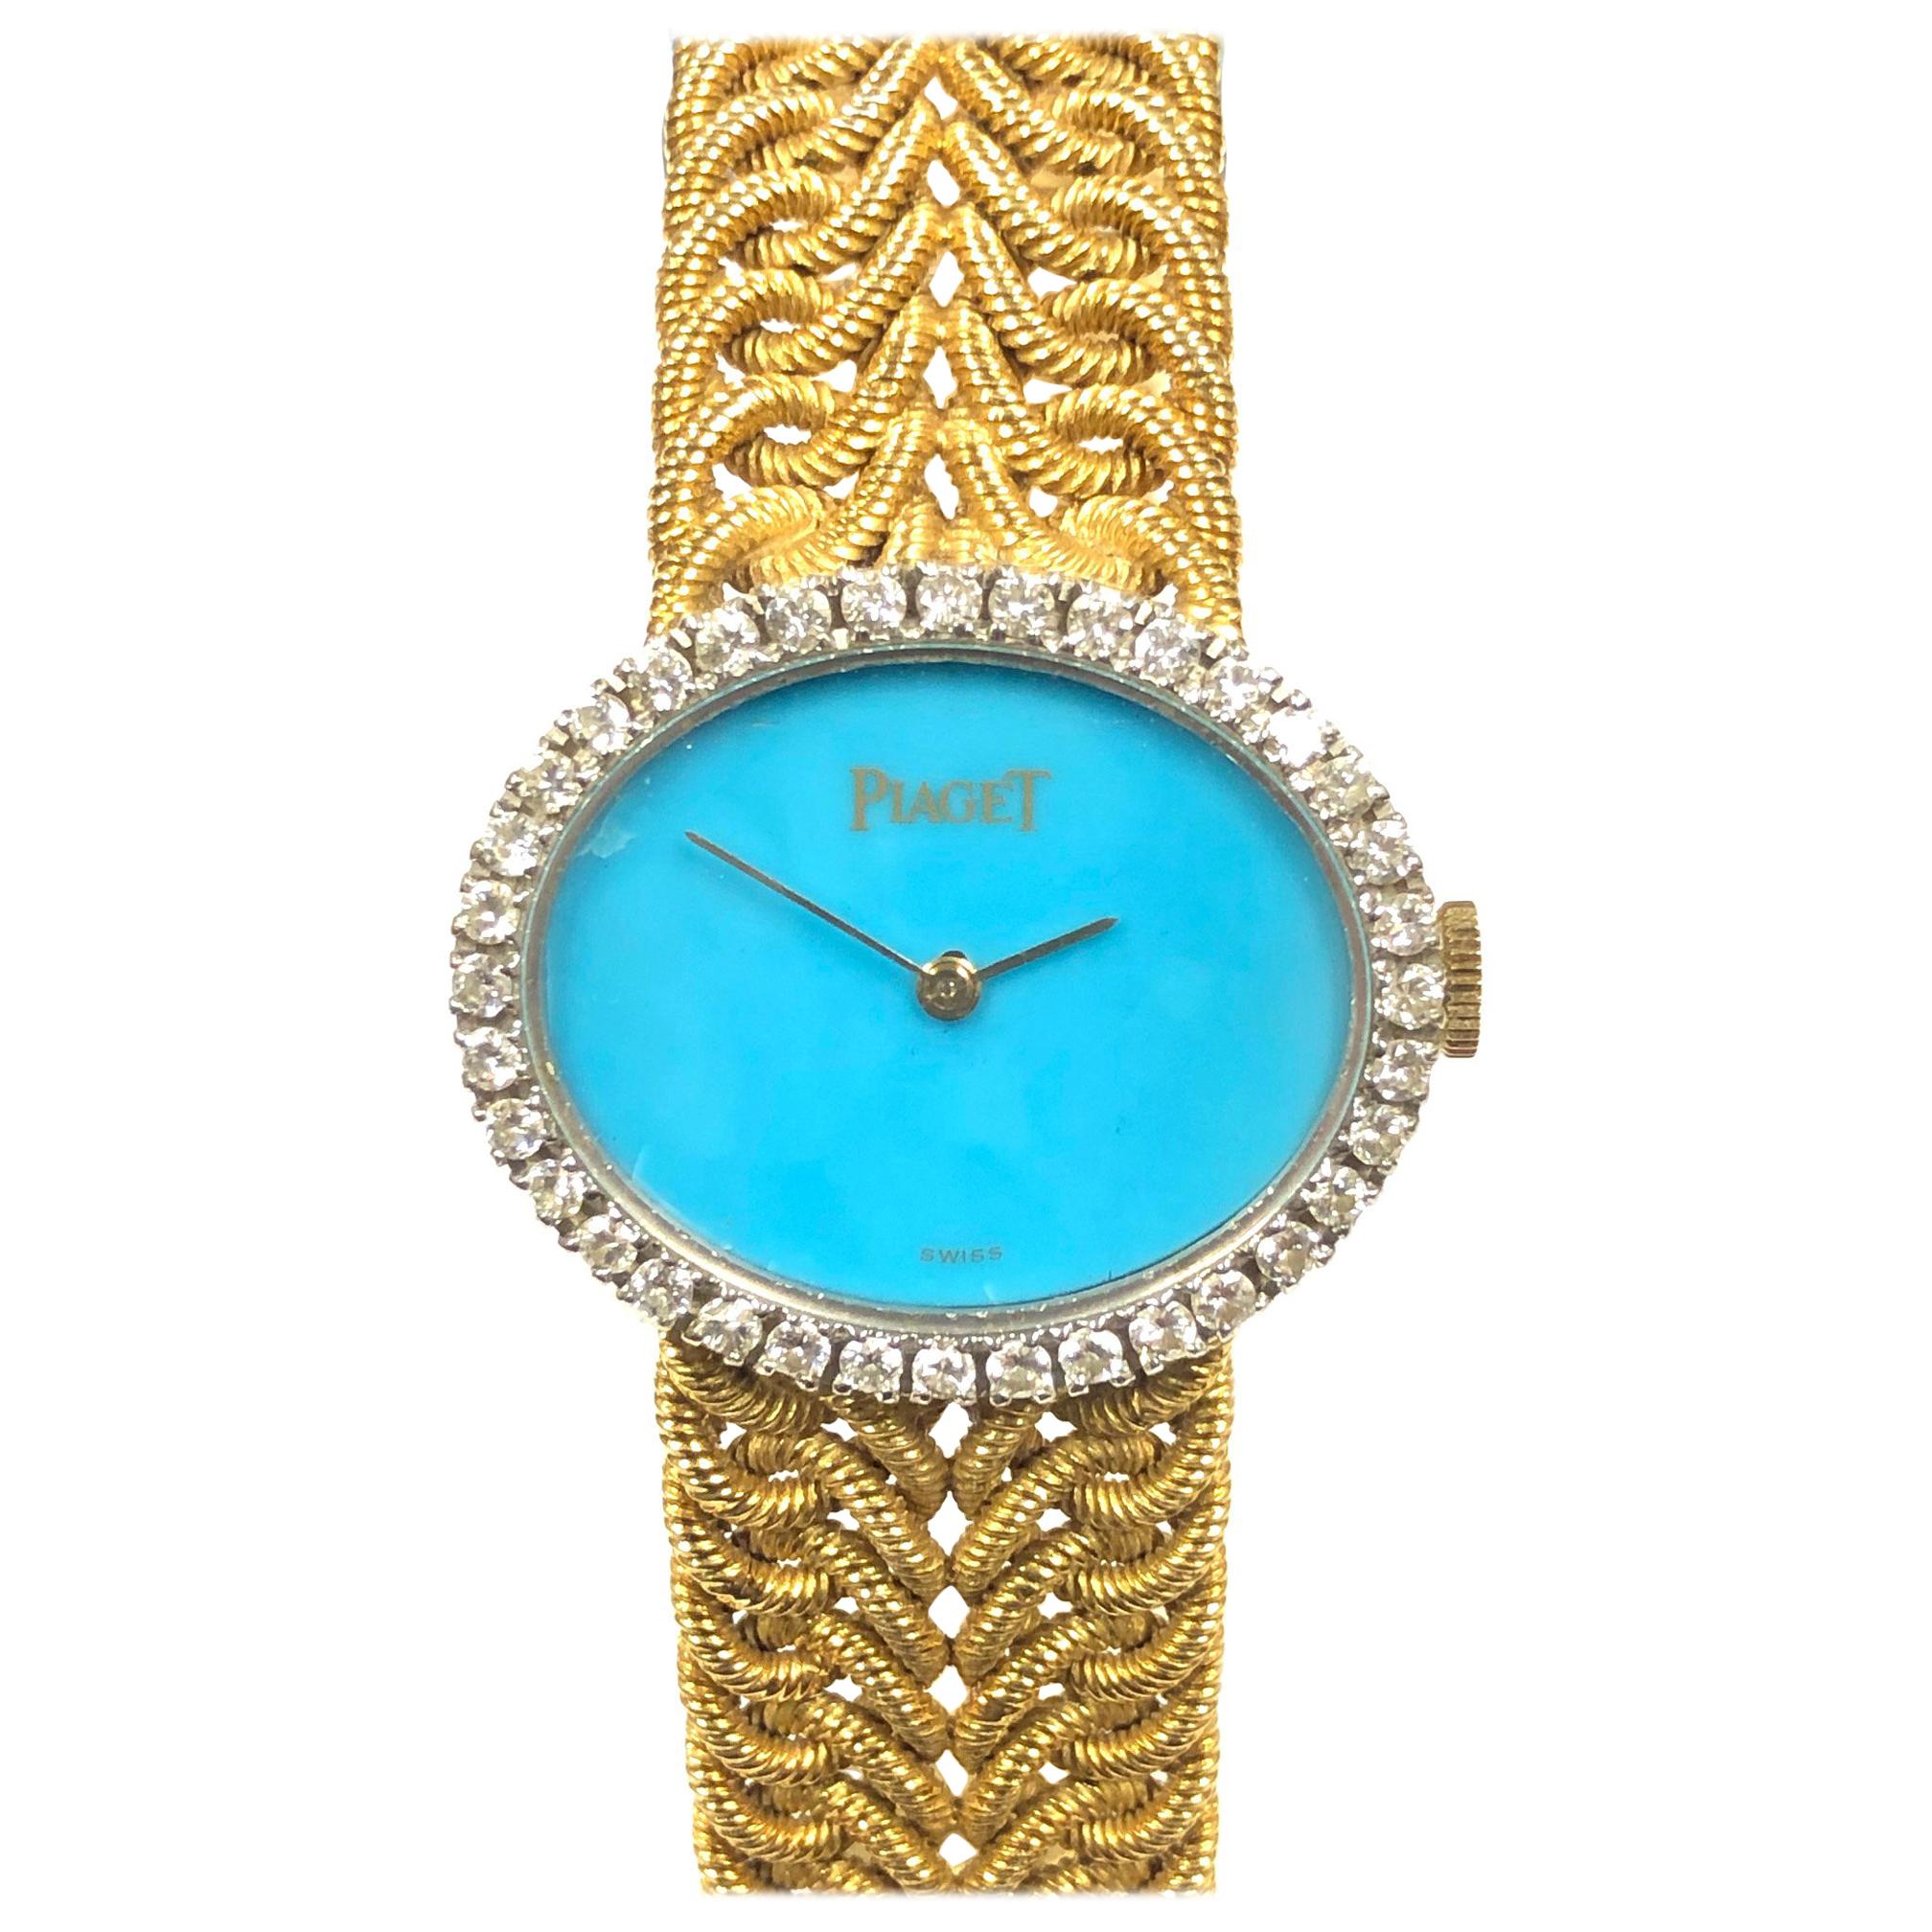 Piaget Ladies Yellow Gold Diamond and Turquoise Dial Mechanical Watch